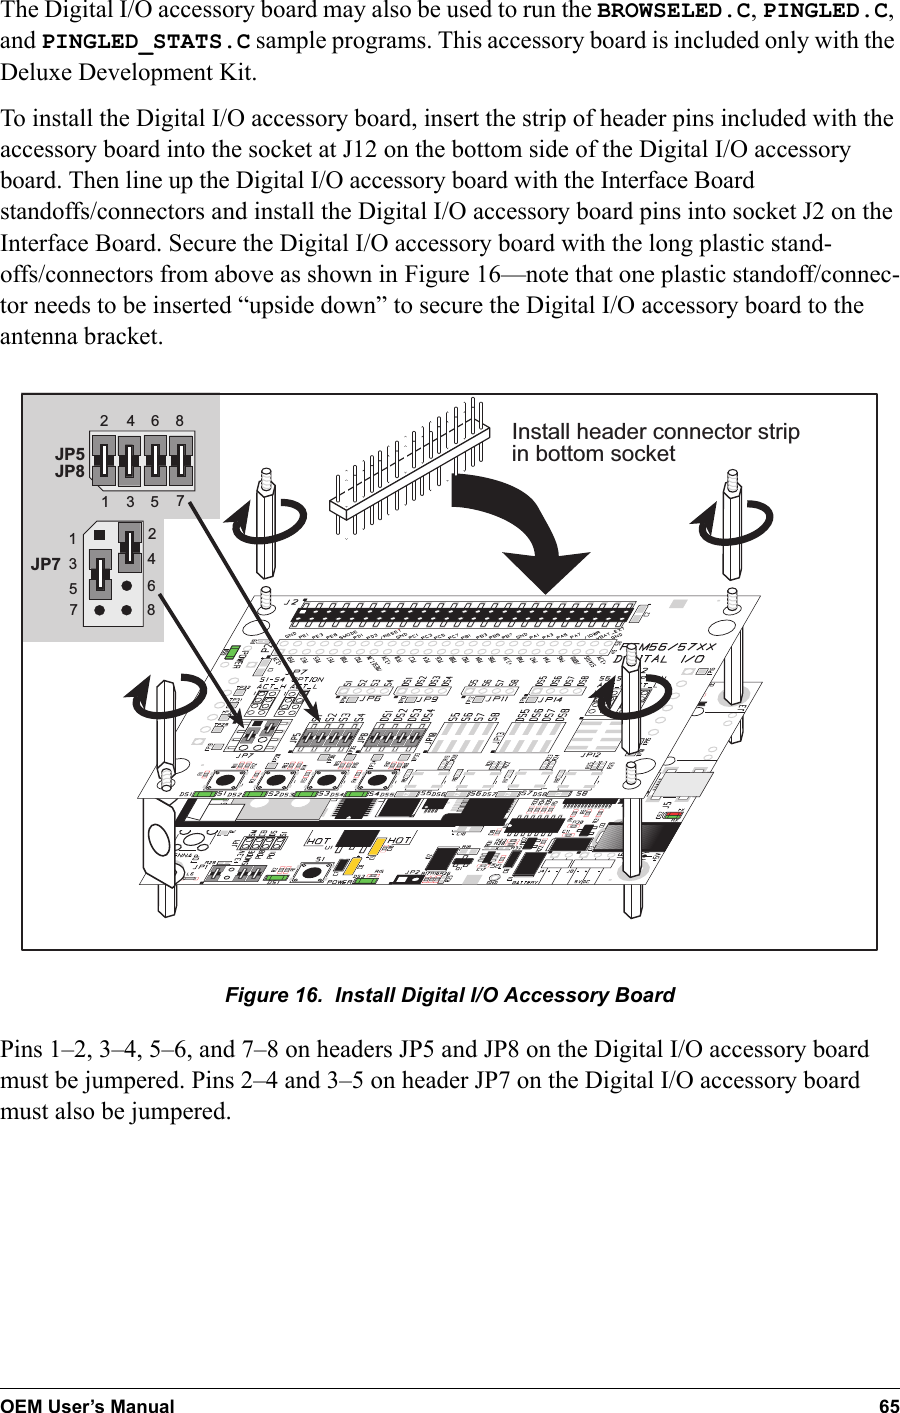 OEM User’s Manual 65The Digital I/O accessory board may also be used to run the BROWSELED.C, PINGLED.C, and PINGLED_STATS.C sample programs. This accessory board is included only with the Deluxe Development Kit.To install the Digital I/O accessory board, insert the strip of header pins included with the accessory board into the socket at J12 on the bottom side of the Digital I/O accessory board. Then line up the Digital I/O accessory board with the Interface Board standoffs/connectors and install the Digital I/O accessory board pins into socket J2 on the Interface Board. Secure the Digital I/O accessory board with the long plastic stand-offs/connectors from above as shown in Figure 16—note that one plastic standoff/connec-tor needs to be inserted “upside down” to secure the Digital I/O accessory board to the antenna bracket.   JP5JP84321657843216578JP7Install header connector stripin bottom socketFigure 16.  Install Digital I/O Accessory BoardPins 1–2, 3–4, 5–6, and 7–8 on headers JP5 and JP8 on the Digital I/O accessory board must be jumpered. Pins 2–4 and 3–5 on header JP7 on the Digital I/O accessory board must also be jumpered.